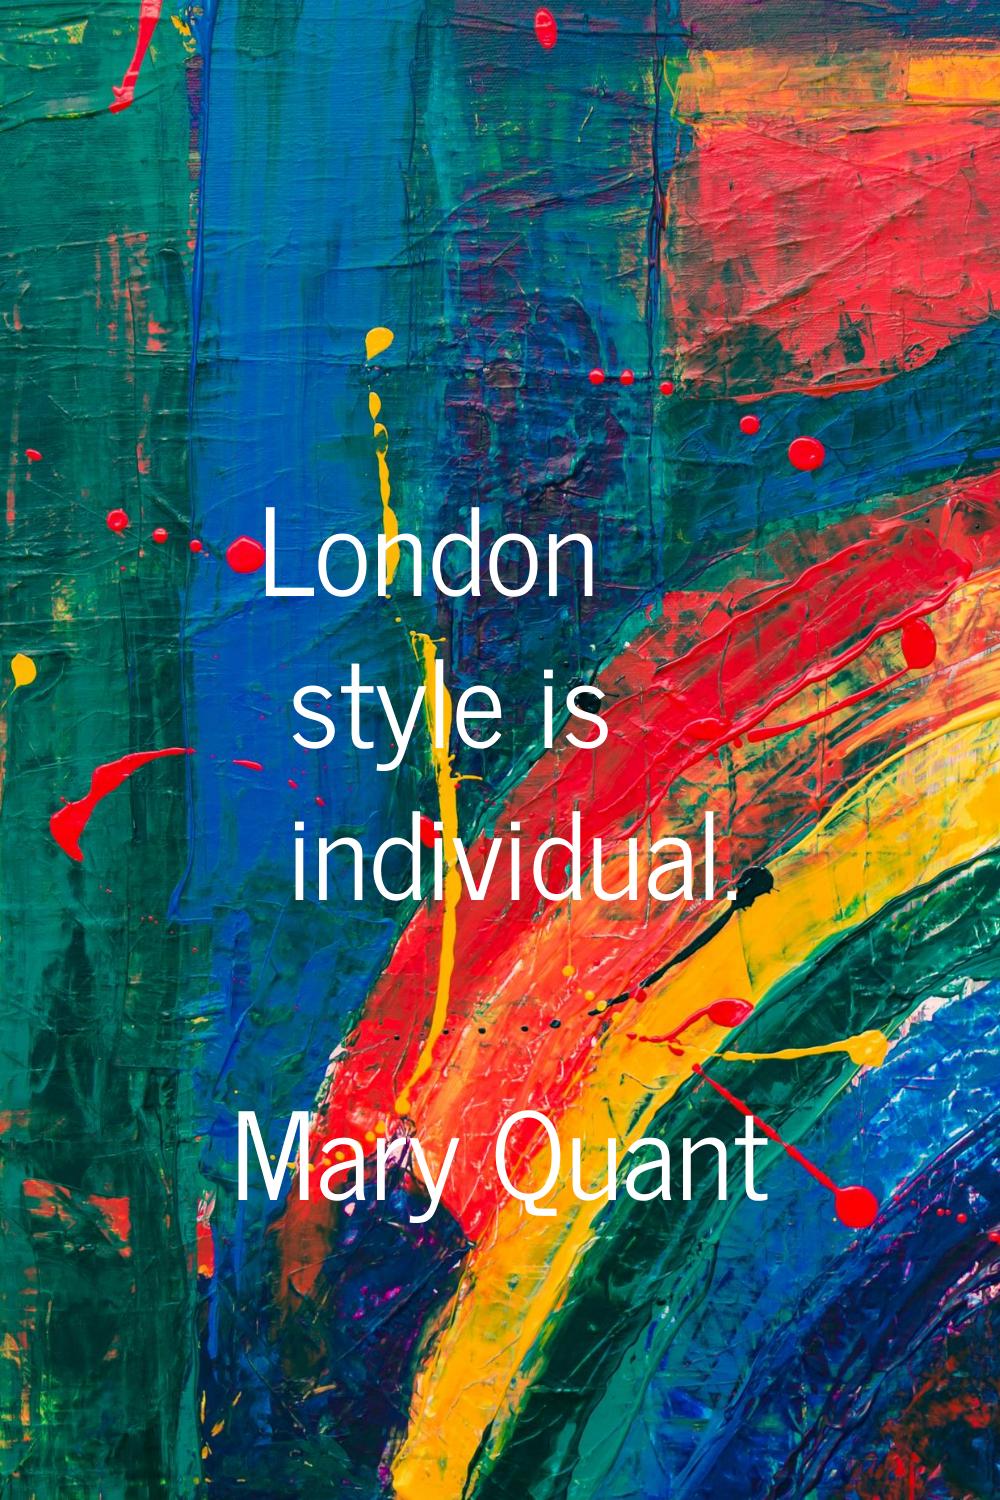 London style is individual.